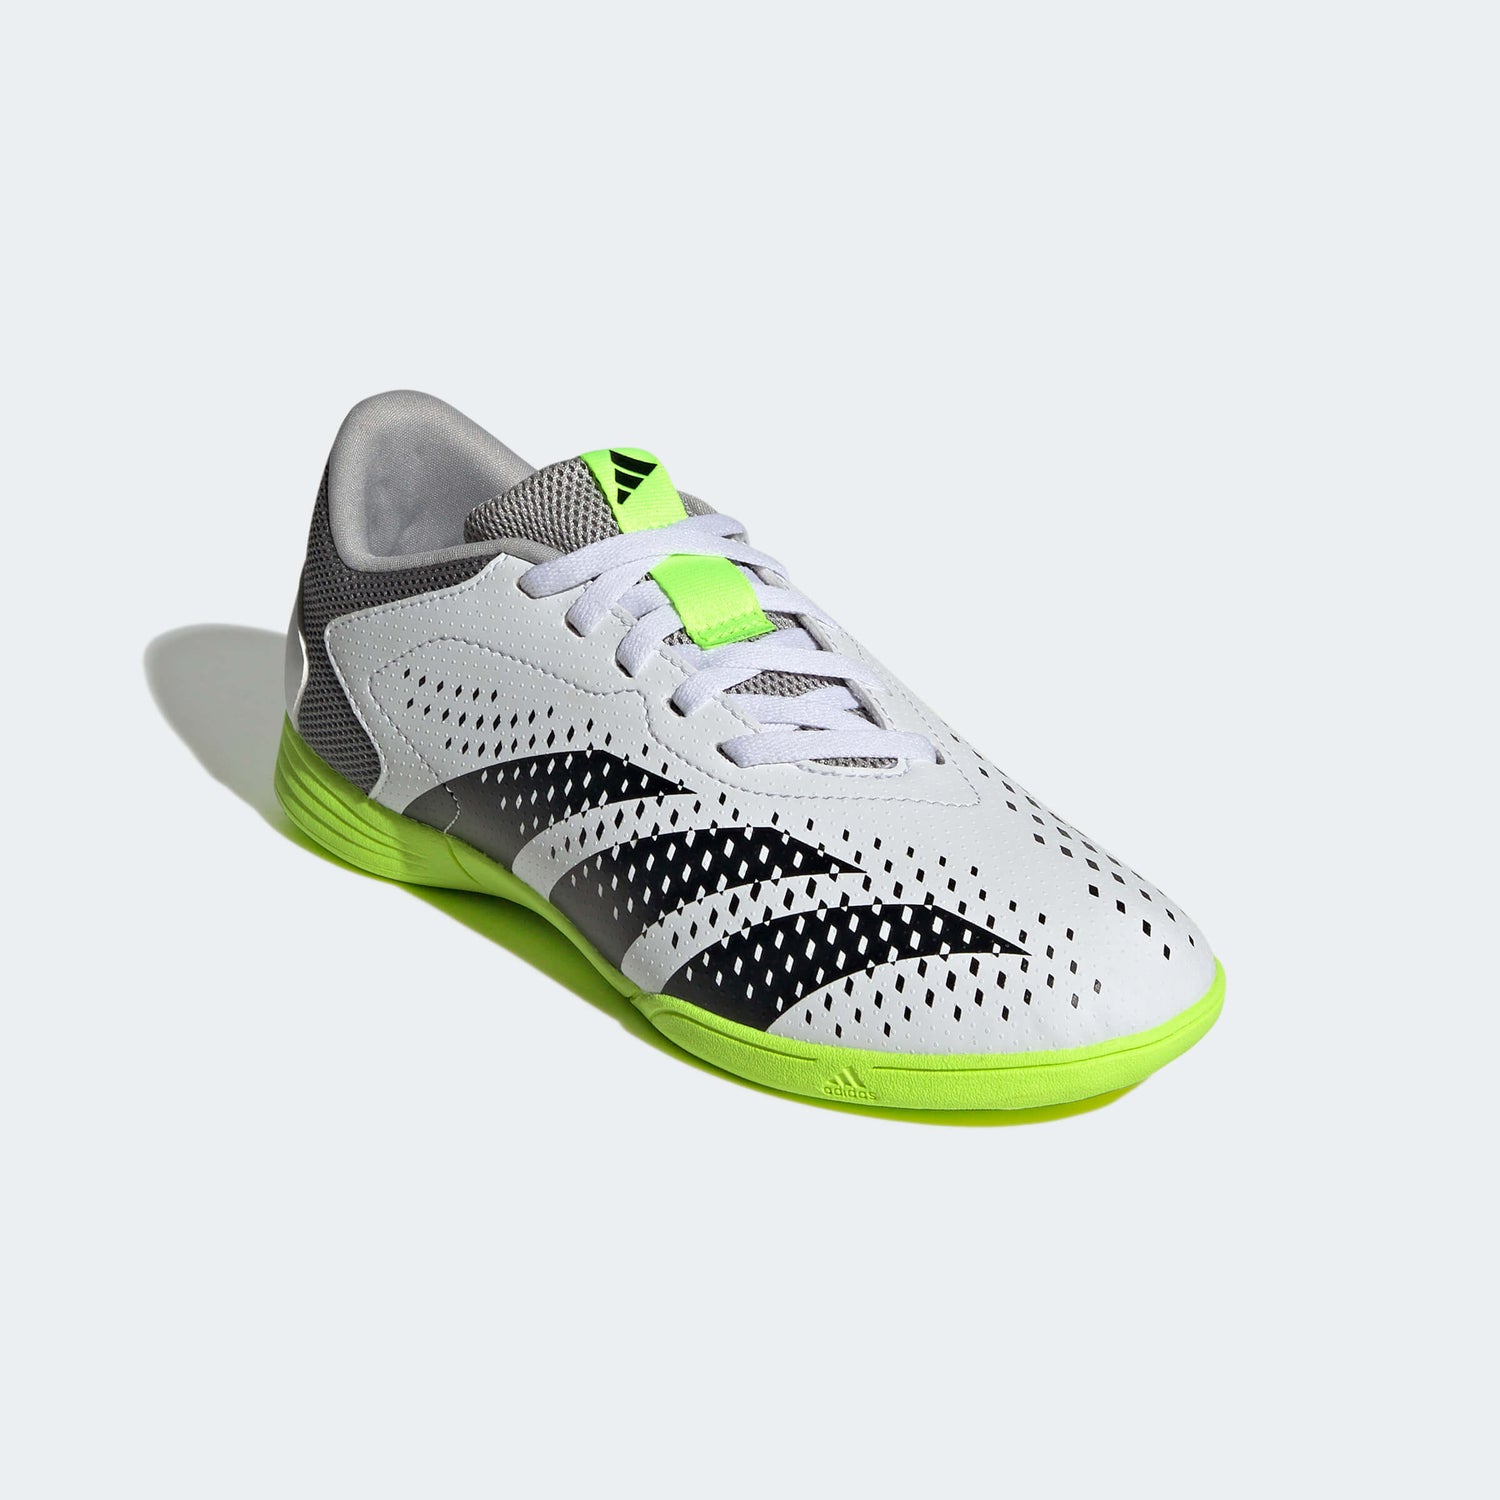 adidas Kids Predator Accuracy.4 Indoor Sala - Crazyrush Pack (FA23) (Lateral Front)